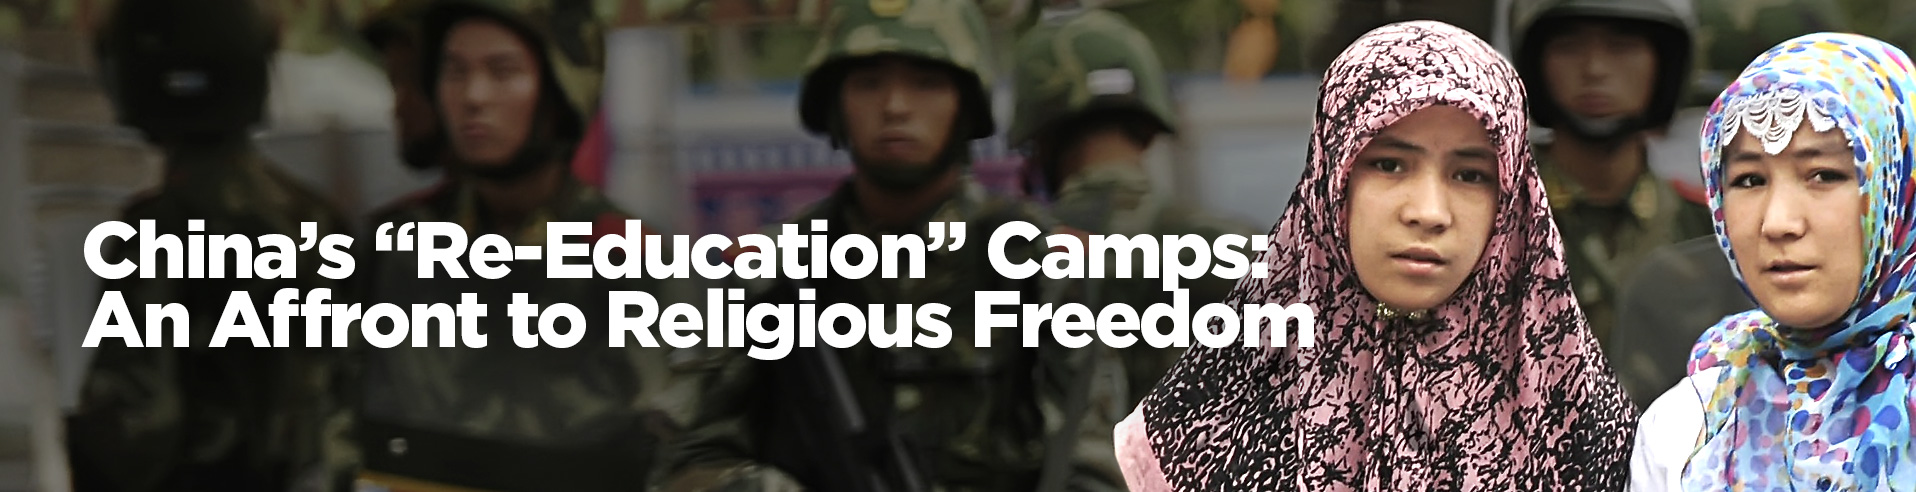 CEMB condemns China’s persecution of Muslims